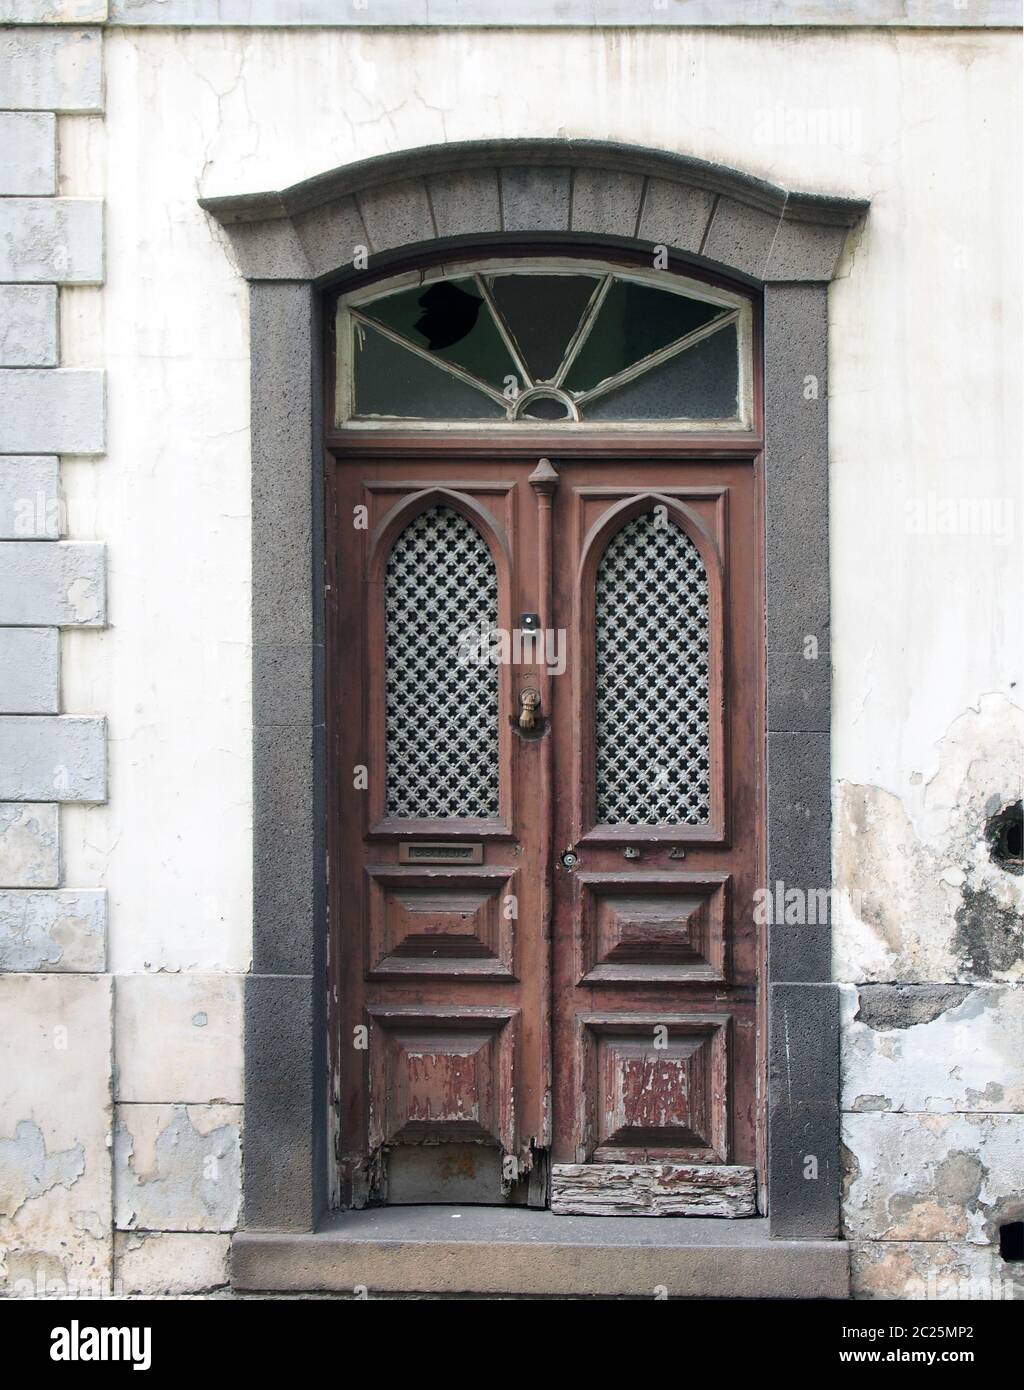 an old ornate brown double house door with broken repaired panels and hand shaped knocker with stone frame and doorstep Stock Photo